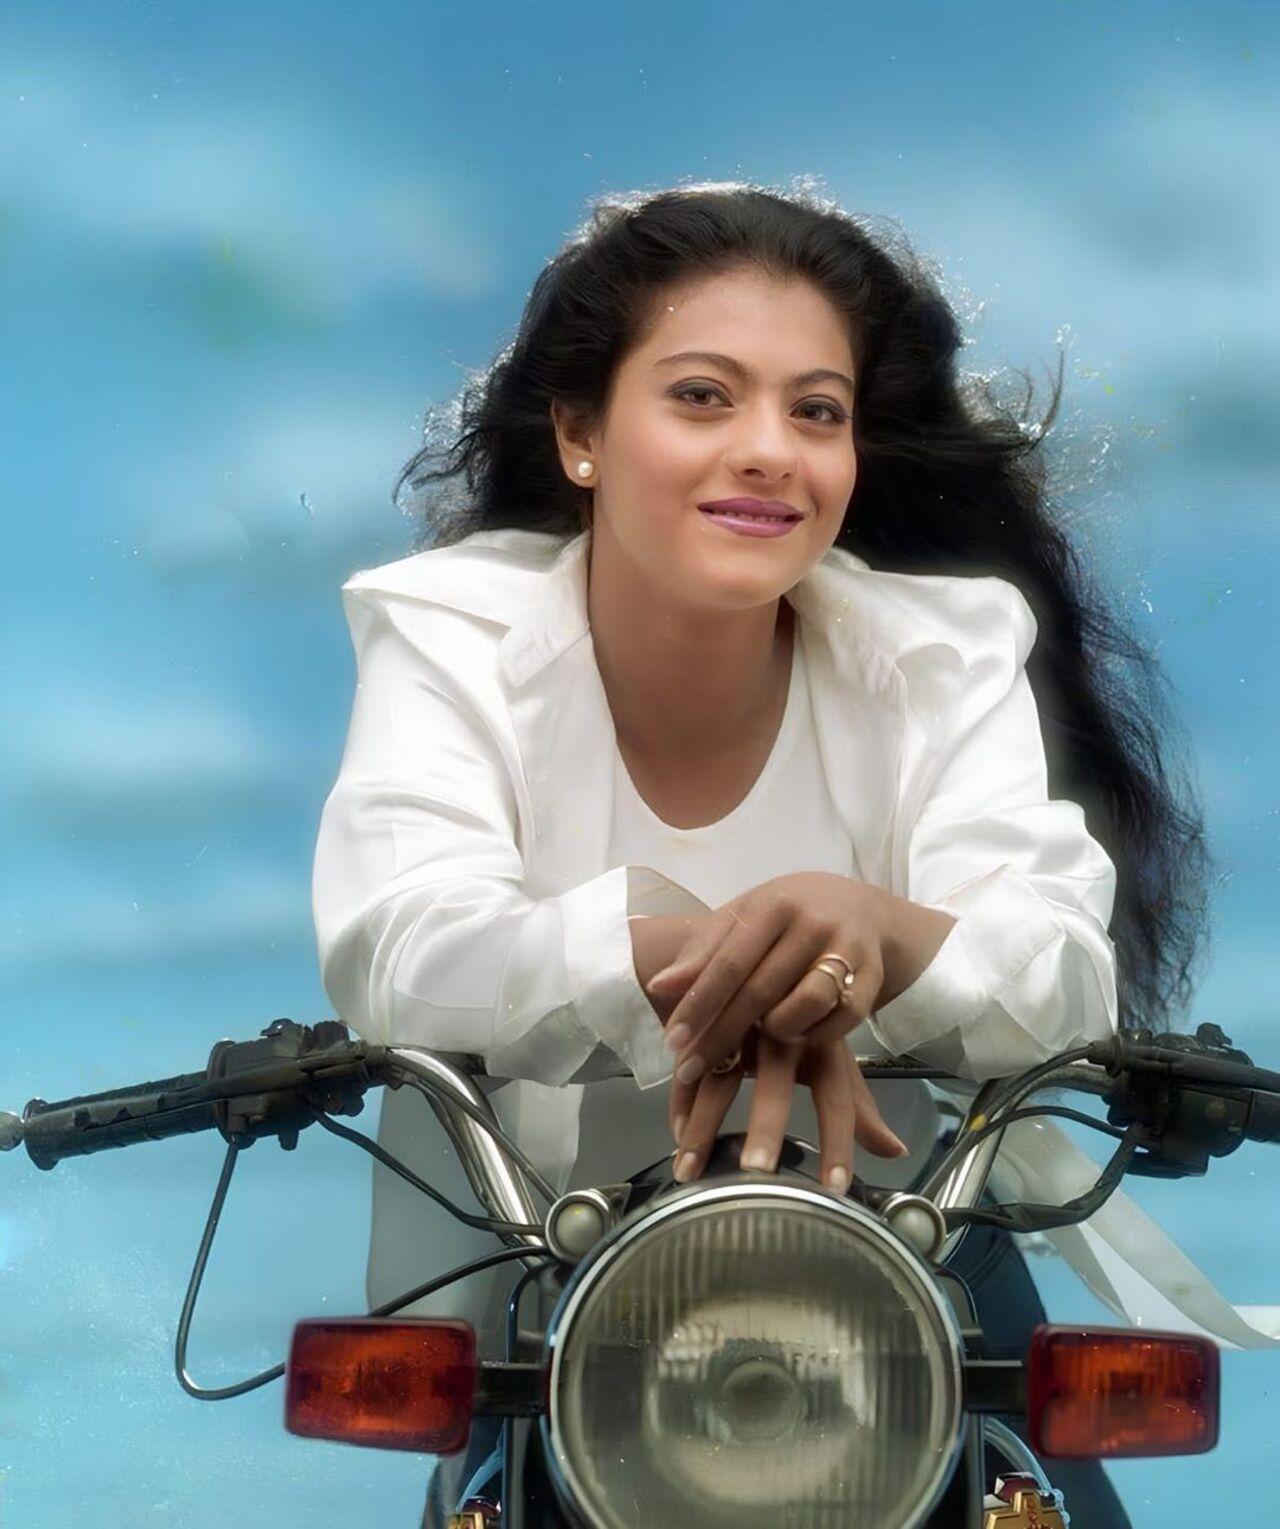 Kajol also took to Instagram to share a picture of herself at the age of 21. The actress shared a still from 'Minasara Kanavu'